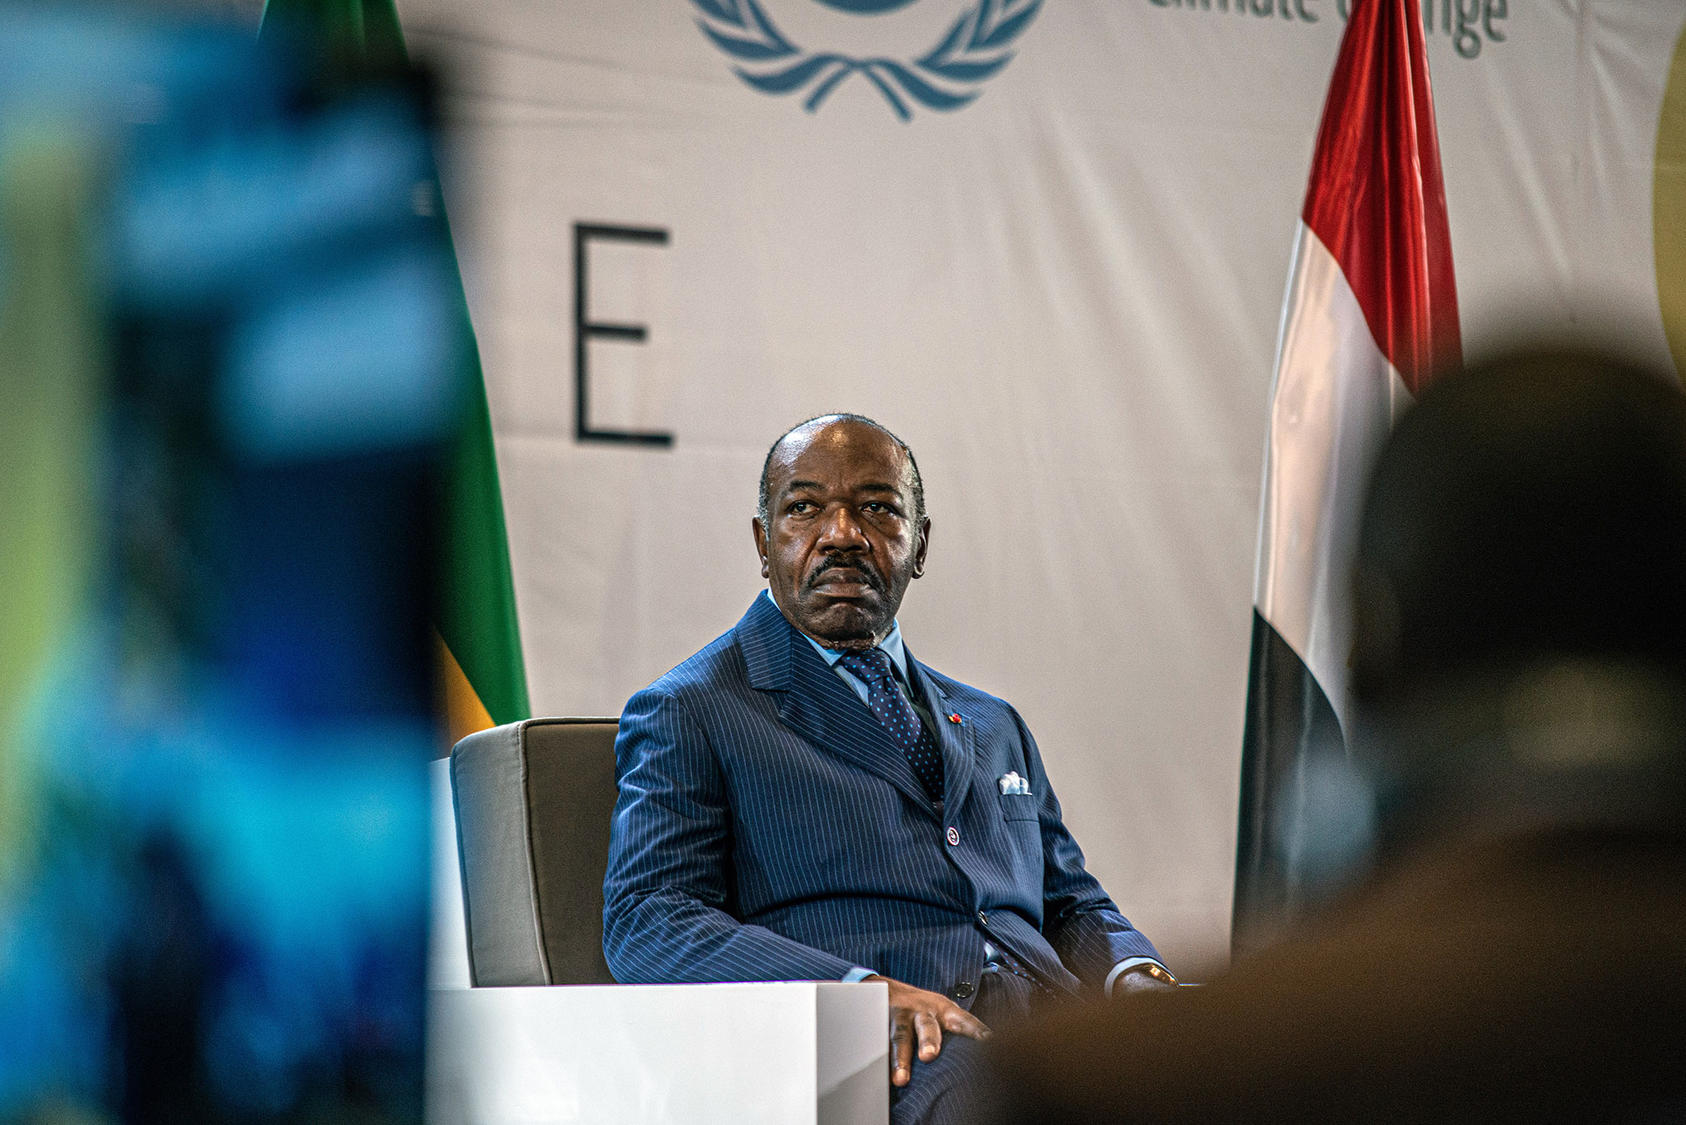 Gabon’s president, Ali Bongo Ondimba, at the opening ceremony of African Climate Week in Libreville, Gabon. July 29, 2022 (Arlette Bashizi/The New York Times)